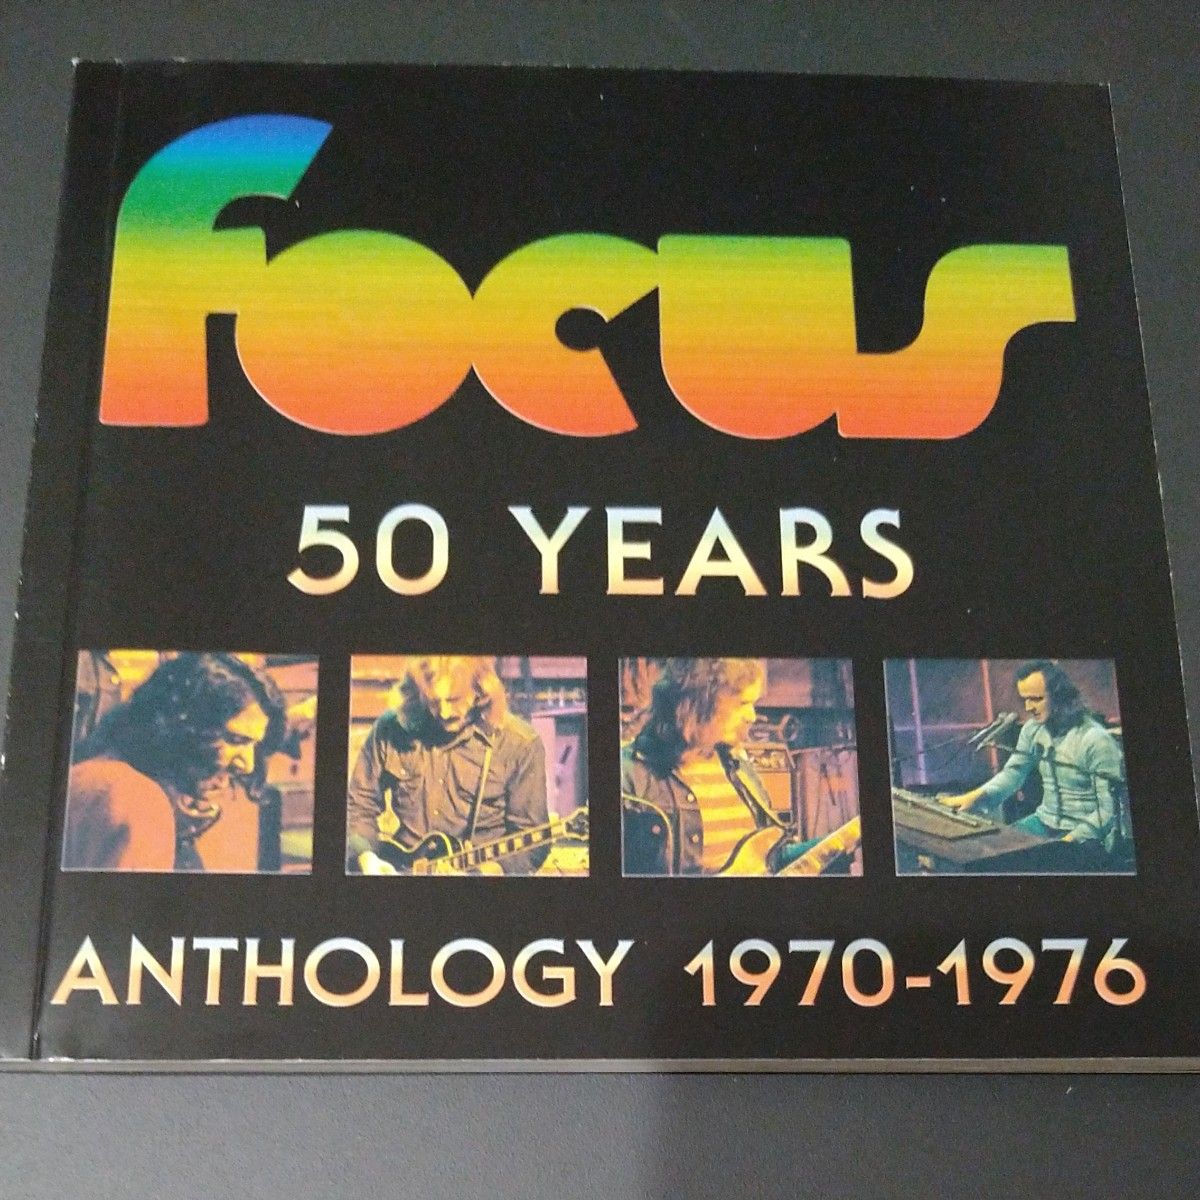 Focus - 50 Years Anthology 1970-1976 9CD＋2DVD(PAL) 輸入盤ボックスセット